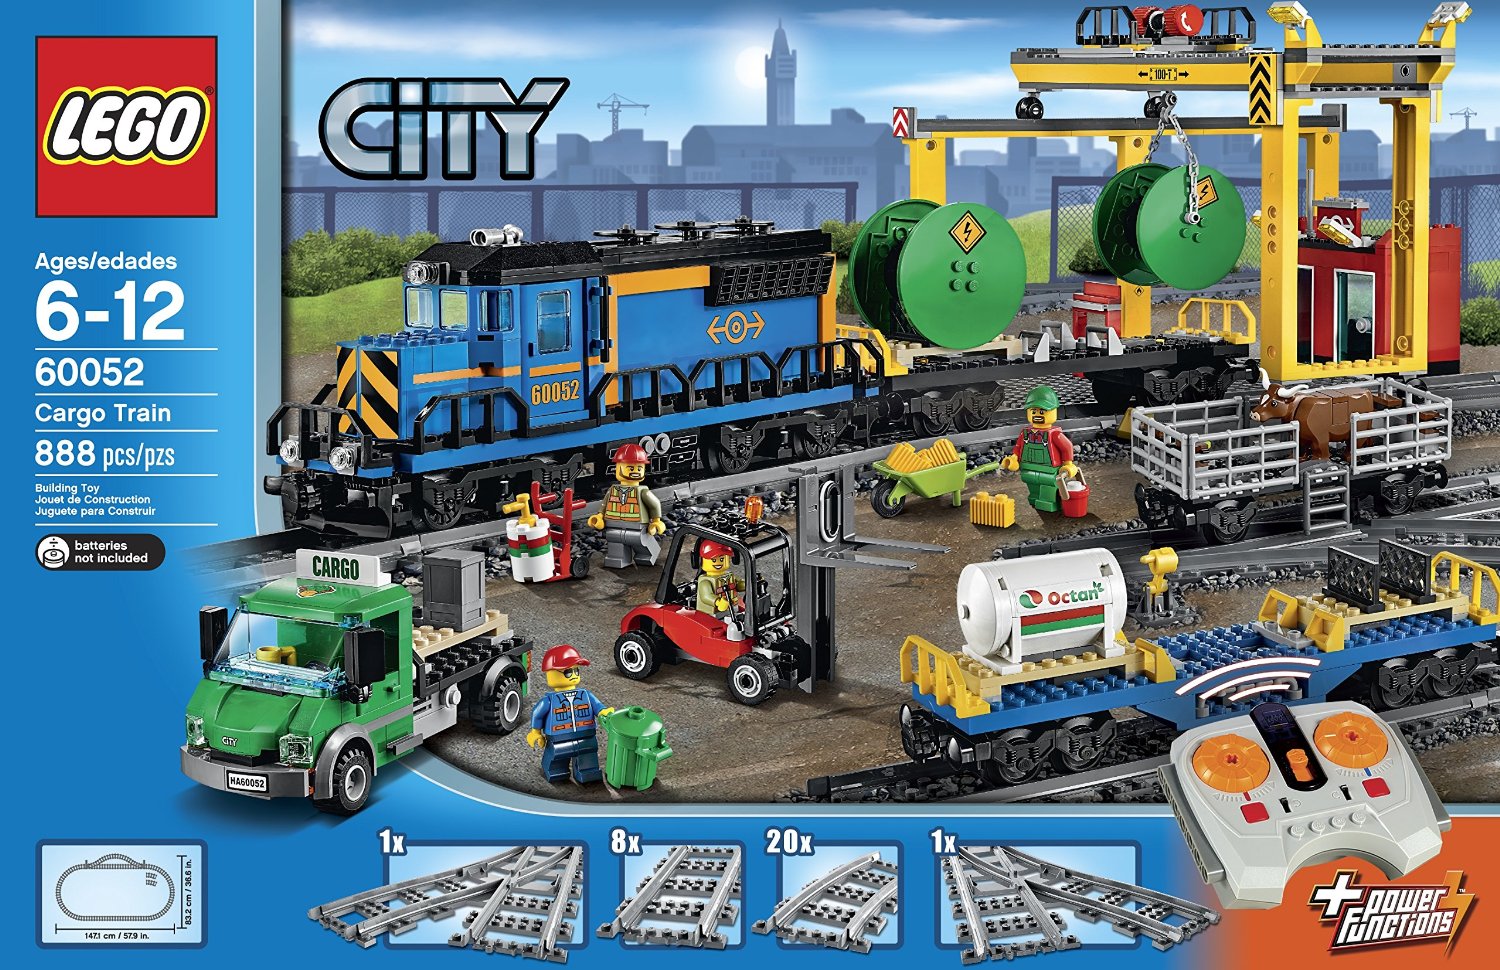 Get Up To 38% Off This 888-Piece LEGO Train Set - Simplemost